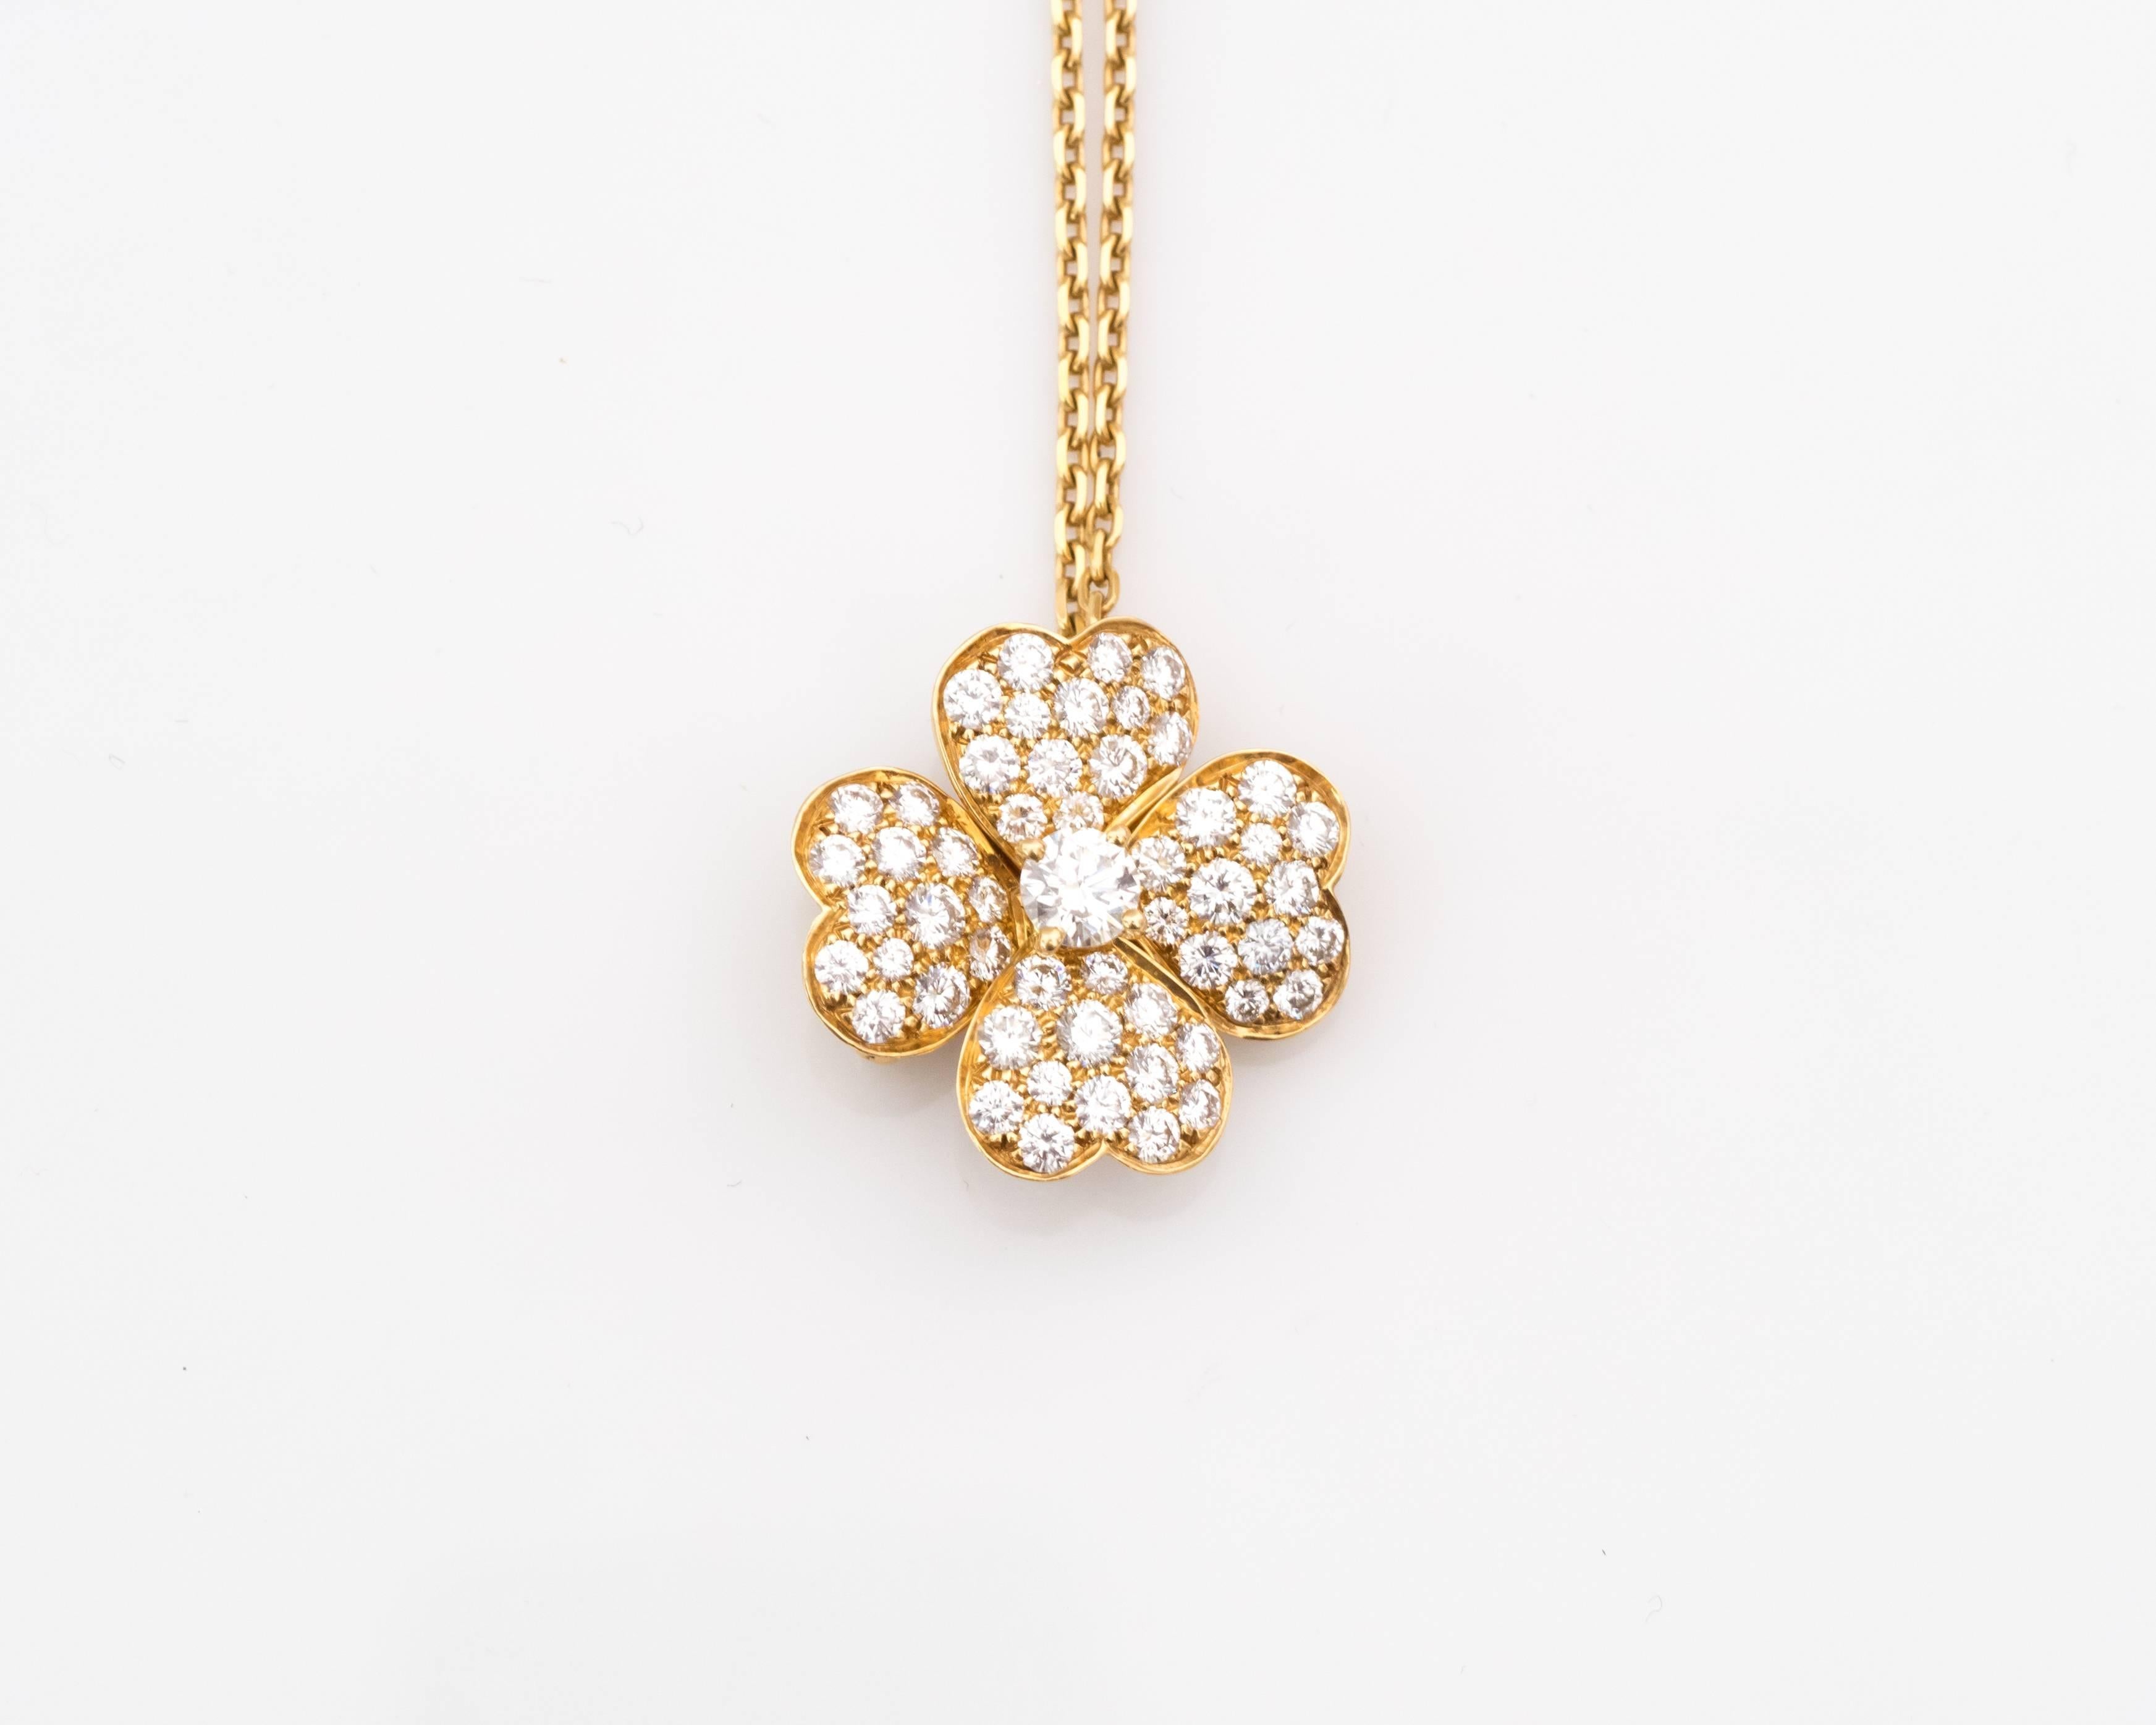 1990s Clover Shaped Diamond Van Cleef Pendant with a 16 Inch Chain
Discontinued Model; Very Rare
Crafted in 18 Karat Yellow Gold

Clover Shaped Pendant features 1.575 carats total of Diamonds
DEF Color
IF-VVS Clarity
52 Round Brilliant Cut Diamonds